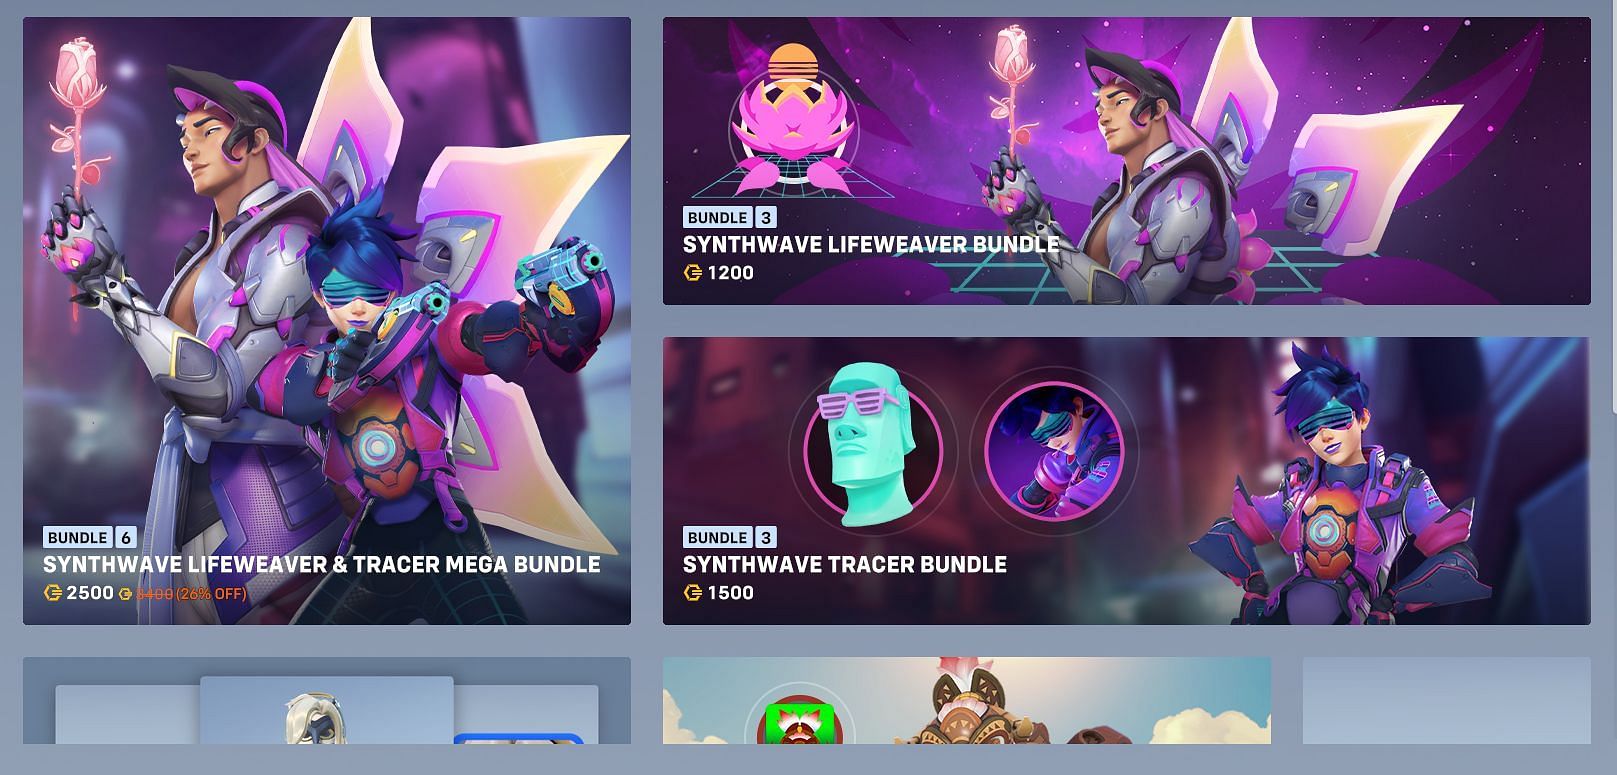 Overwatch 2 Item Shop rotation (August 29): Synthwave Lifeweaver &amp; Tracer, and more (Image via Blizzard Entertainment)